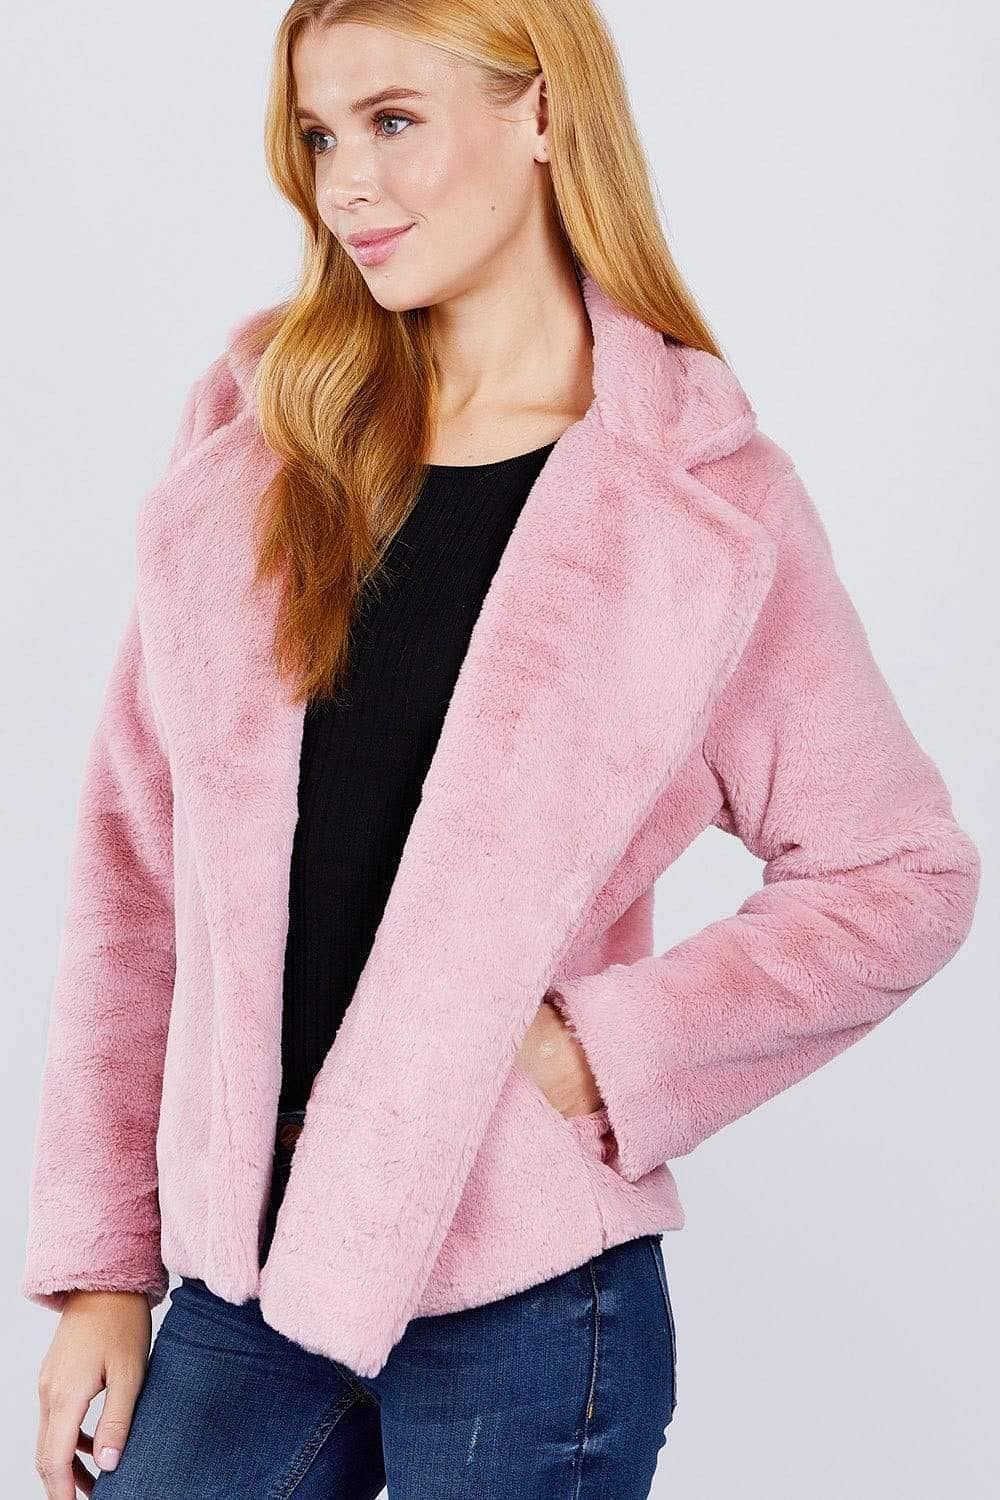 Pink Long Sleeve Faux Fur Jacket - Shopping Therapy, LLC jackets